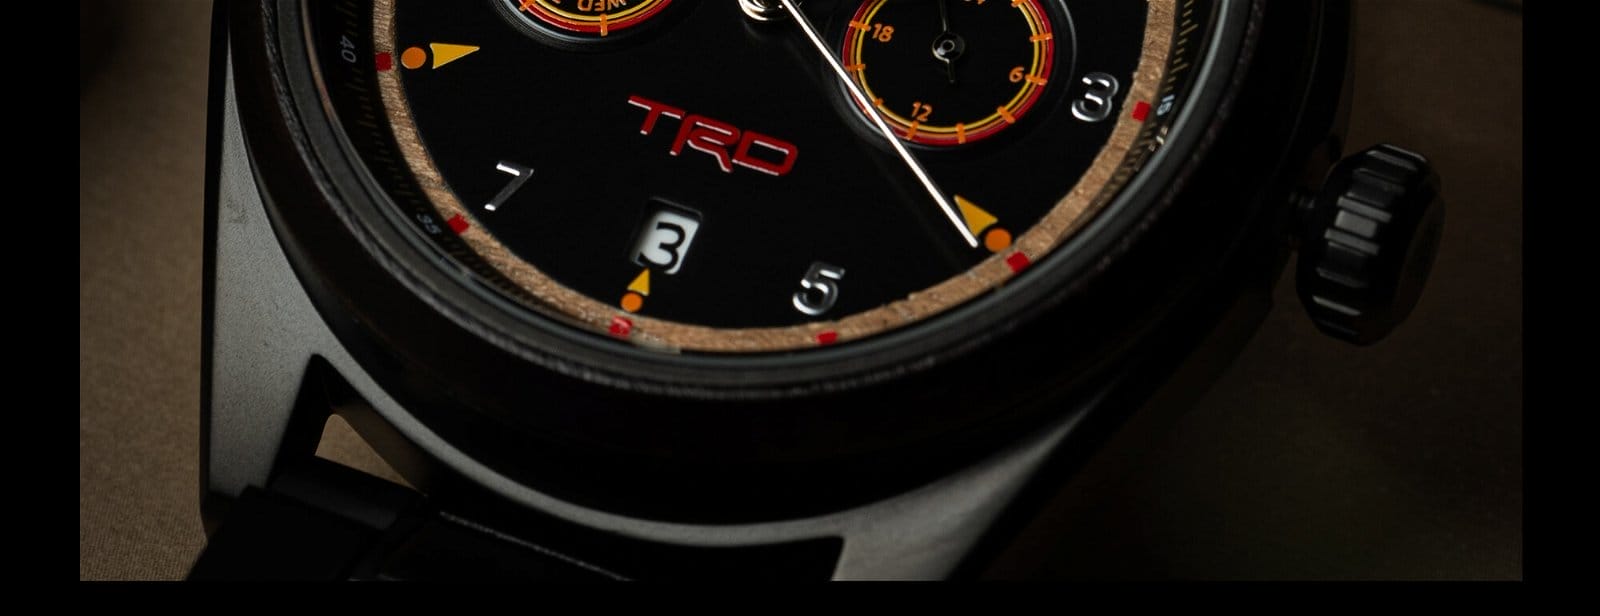 Enter to win a new TRD Vintage Nomad Watch launching tomorrow from Original Grain